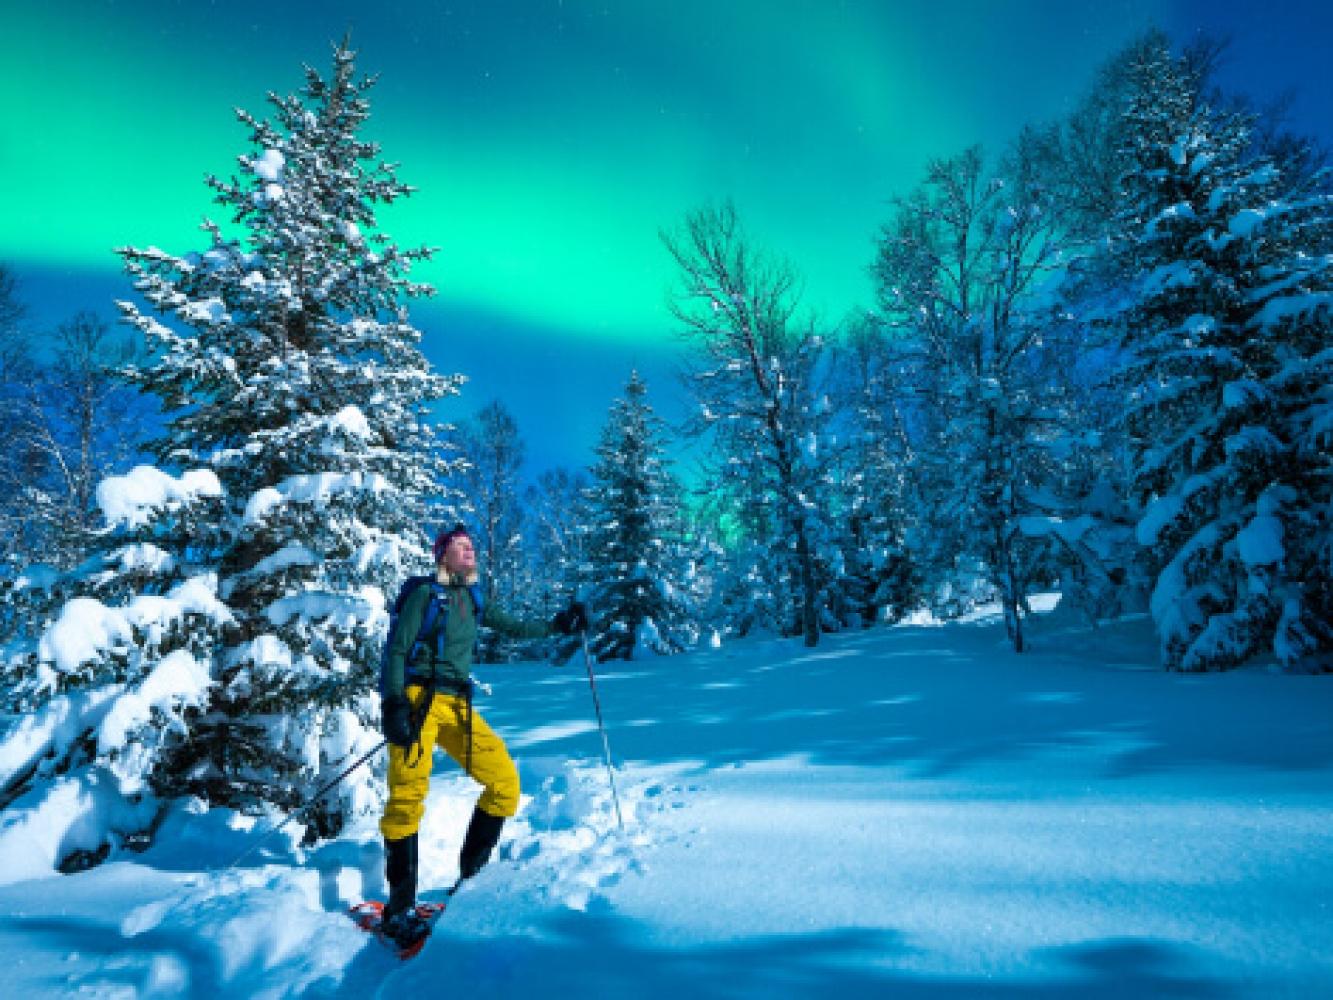 Lady enjoying the northern lights with snowshoes